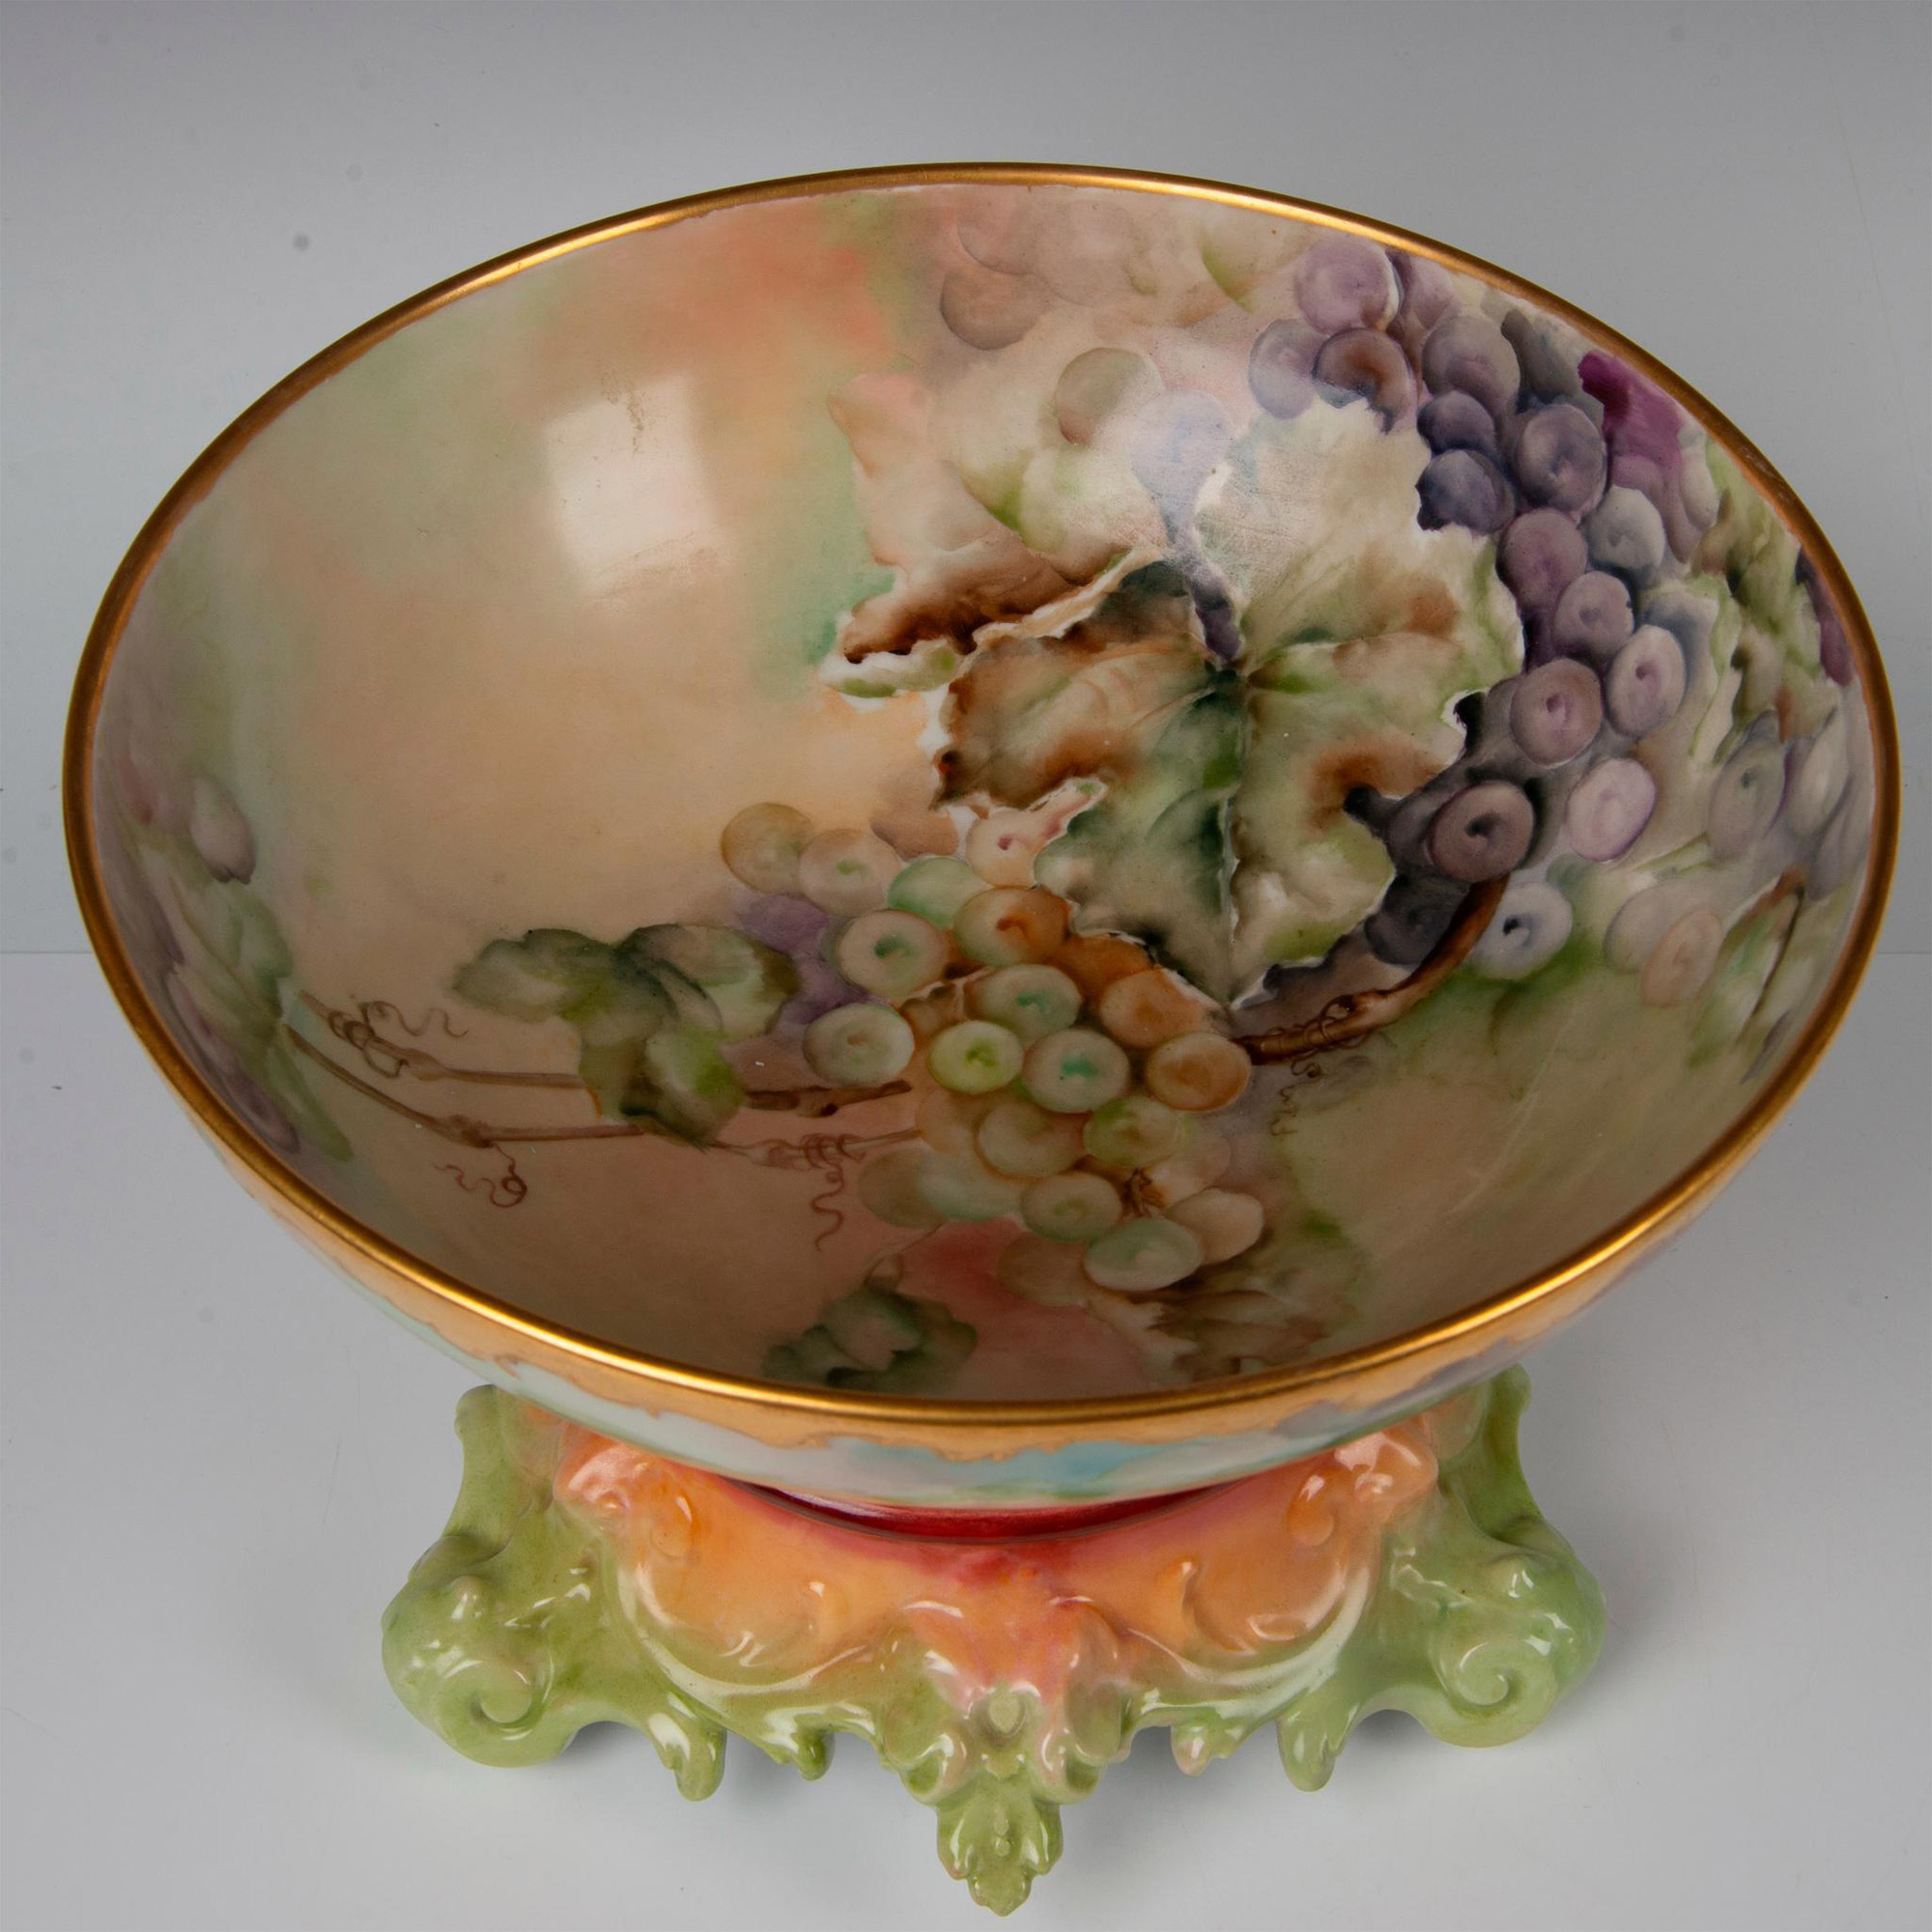 2pc Tressemanes & Vogt Limoges Hand Painted Punch Bowl with Stand - Image 2 of 8